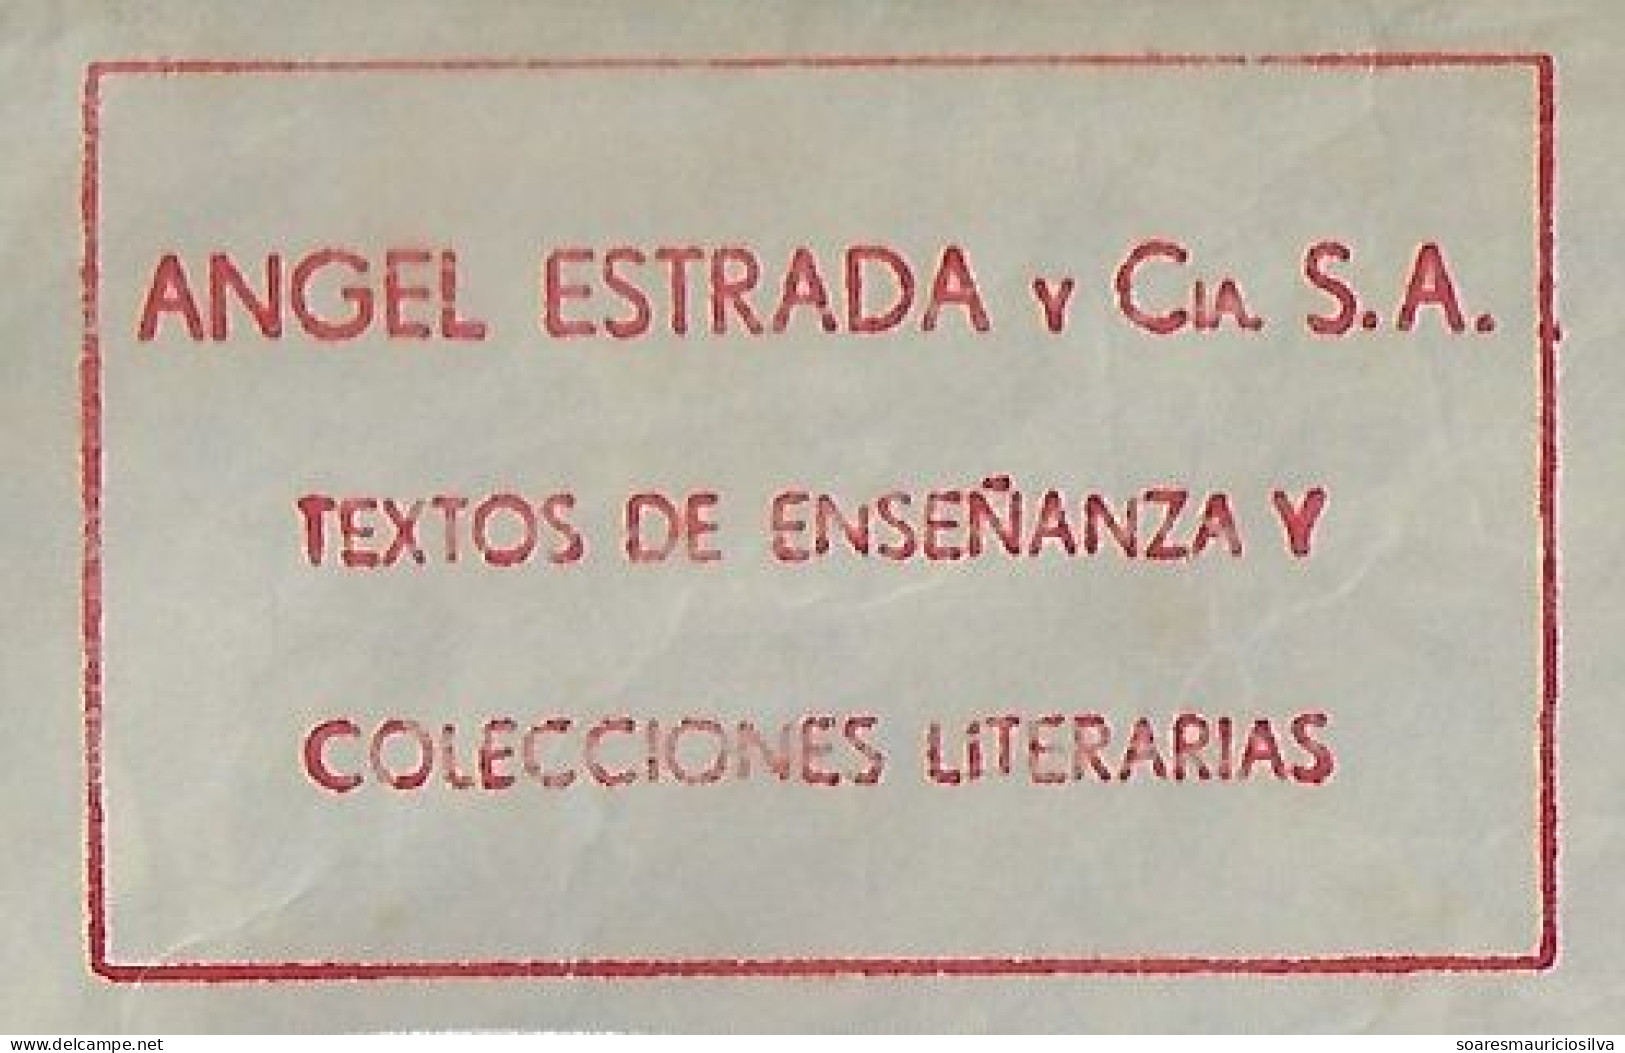 Argentina 1972 Cover From Buenos Aires Meter Stamp Hasler Slogan Angel Estrada Co. teaching Texts & Literary Collections - Covers & Documents